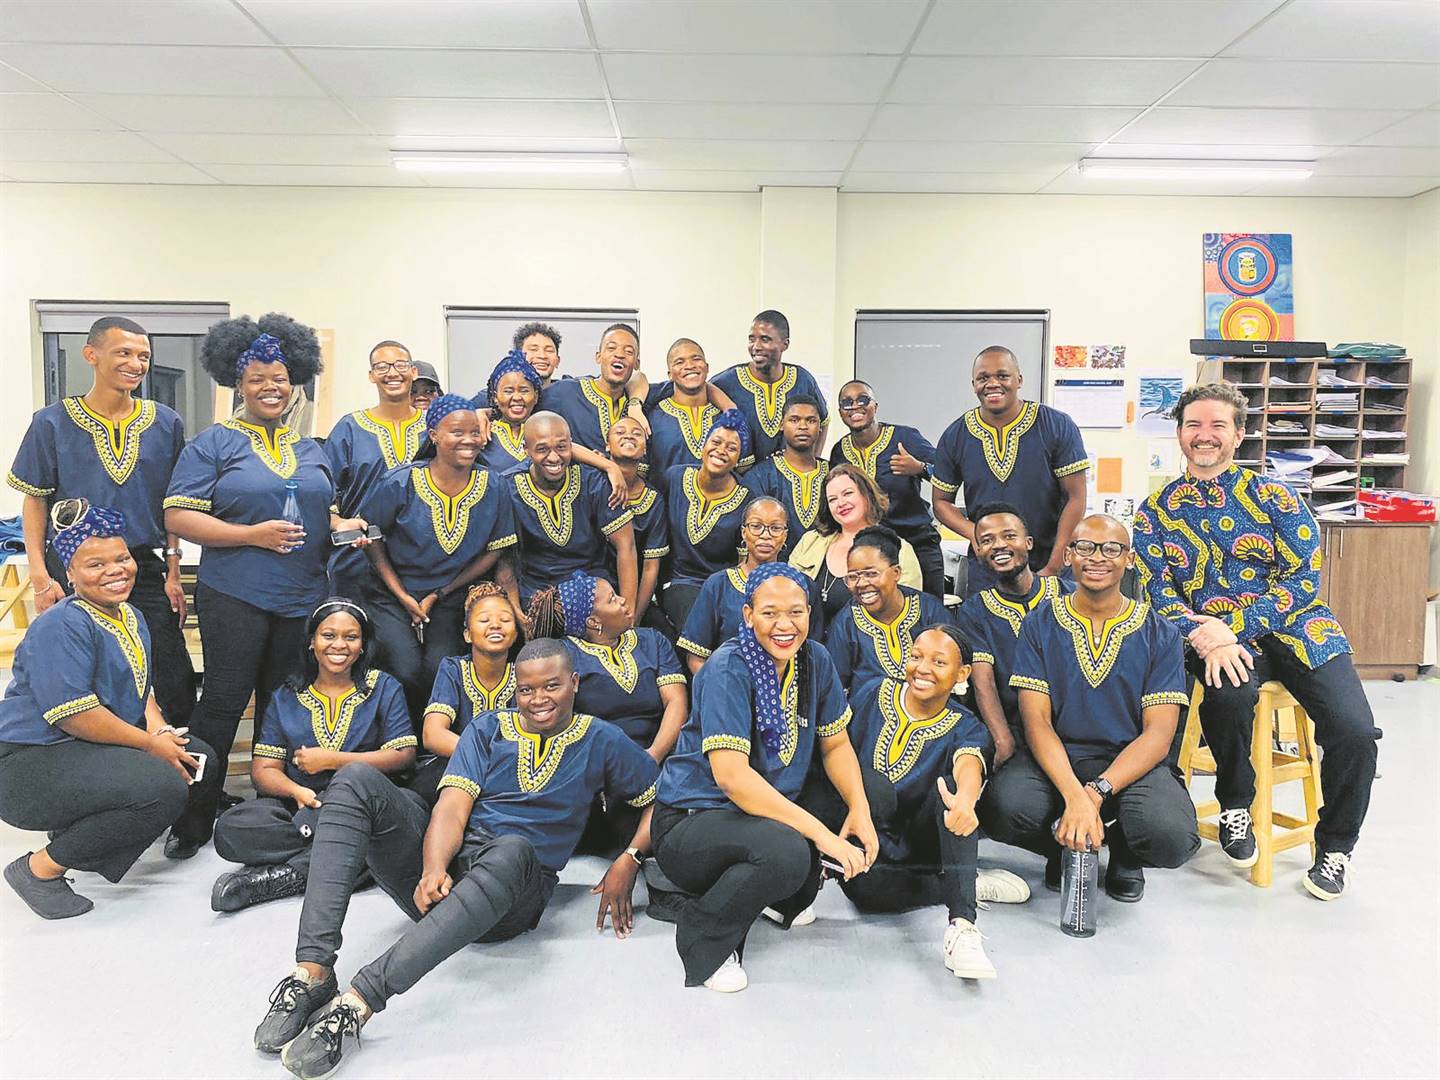 A group of Korean singers joined by the acclaimed Nelson Mandela University choir (pictured) will set the stage for a special concert to celebrate the first-ever Korea-Africa Summit on Mother’s Day, May 12, at the Nelson Mandela University South Campus Auditorium